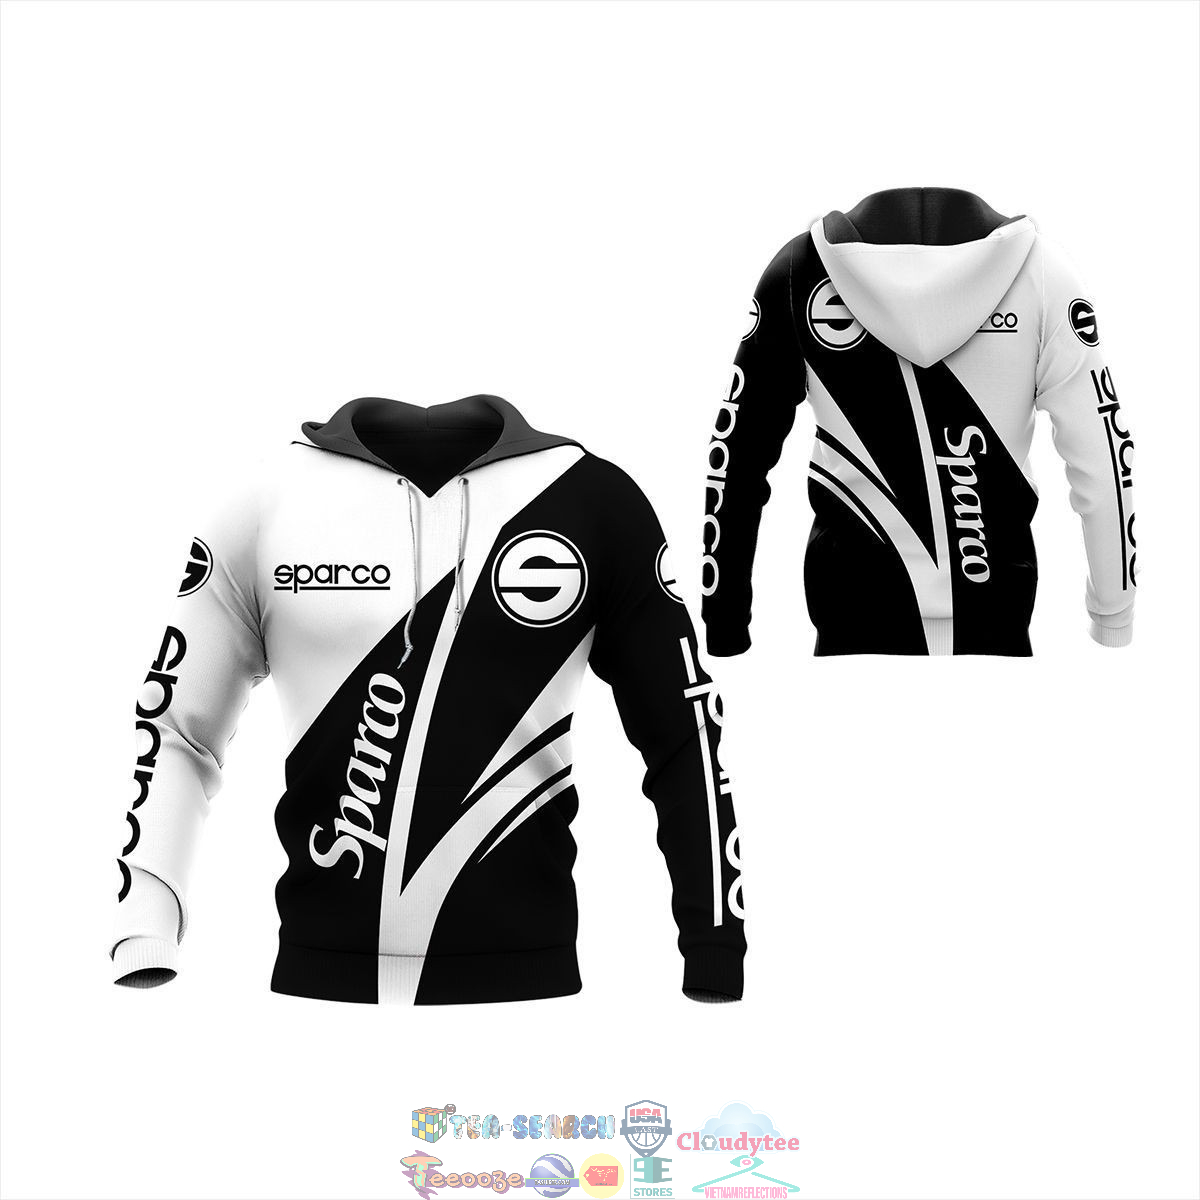 Sparco ver 27 3D hoodie and t-shirt